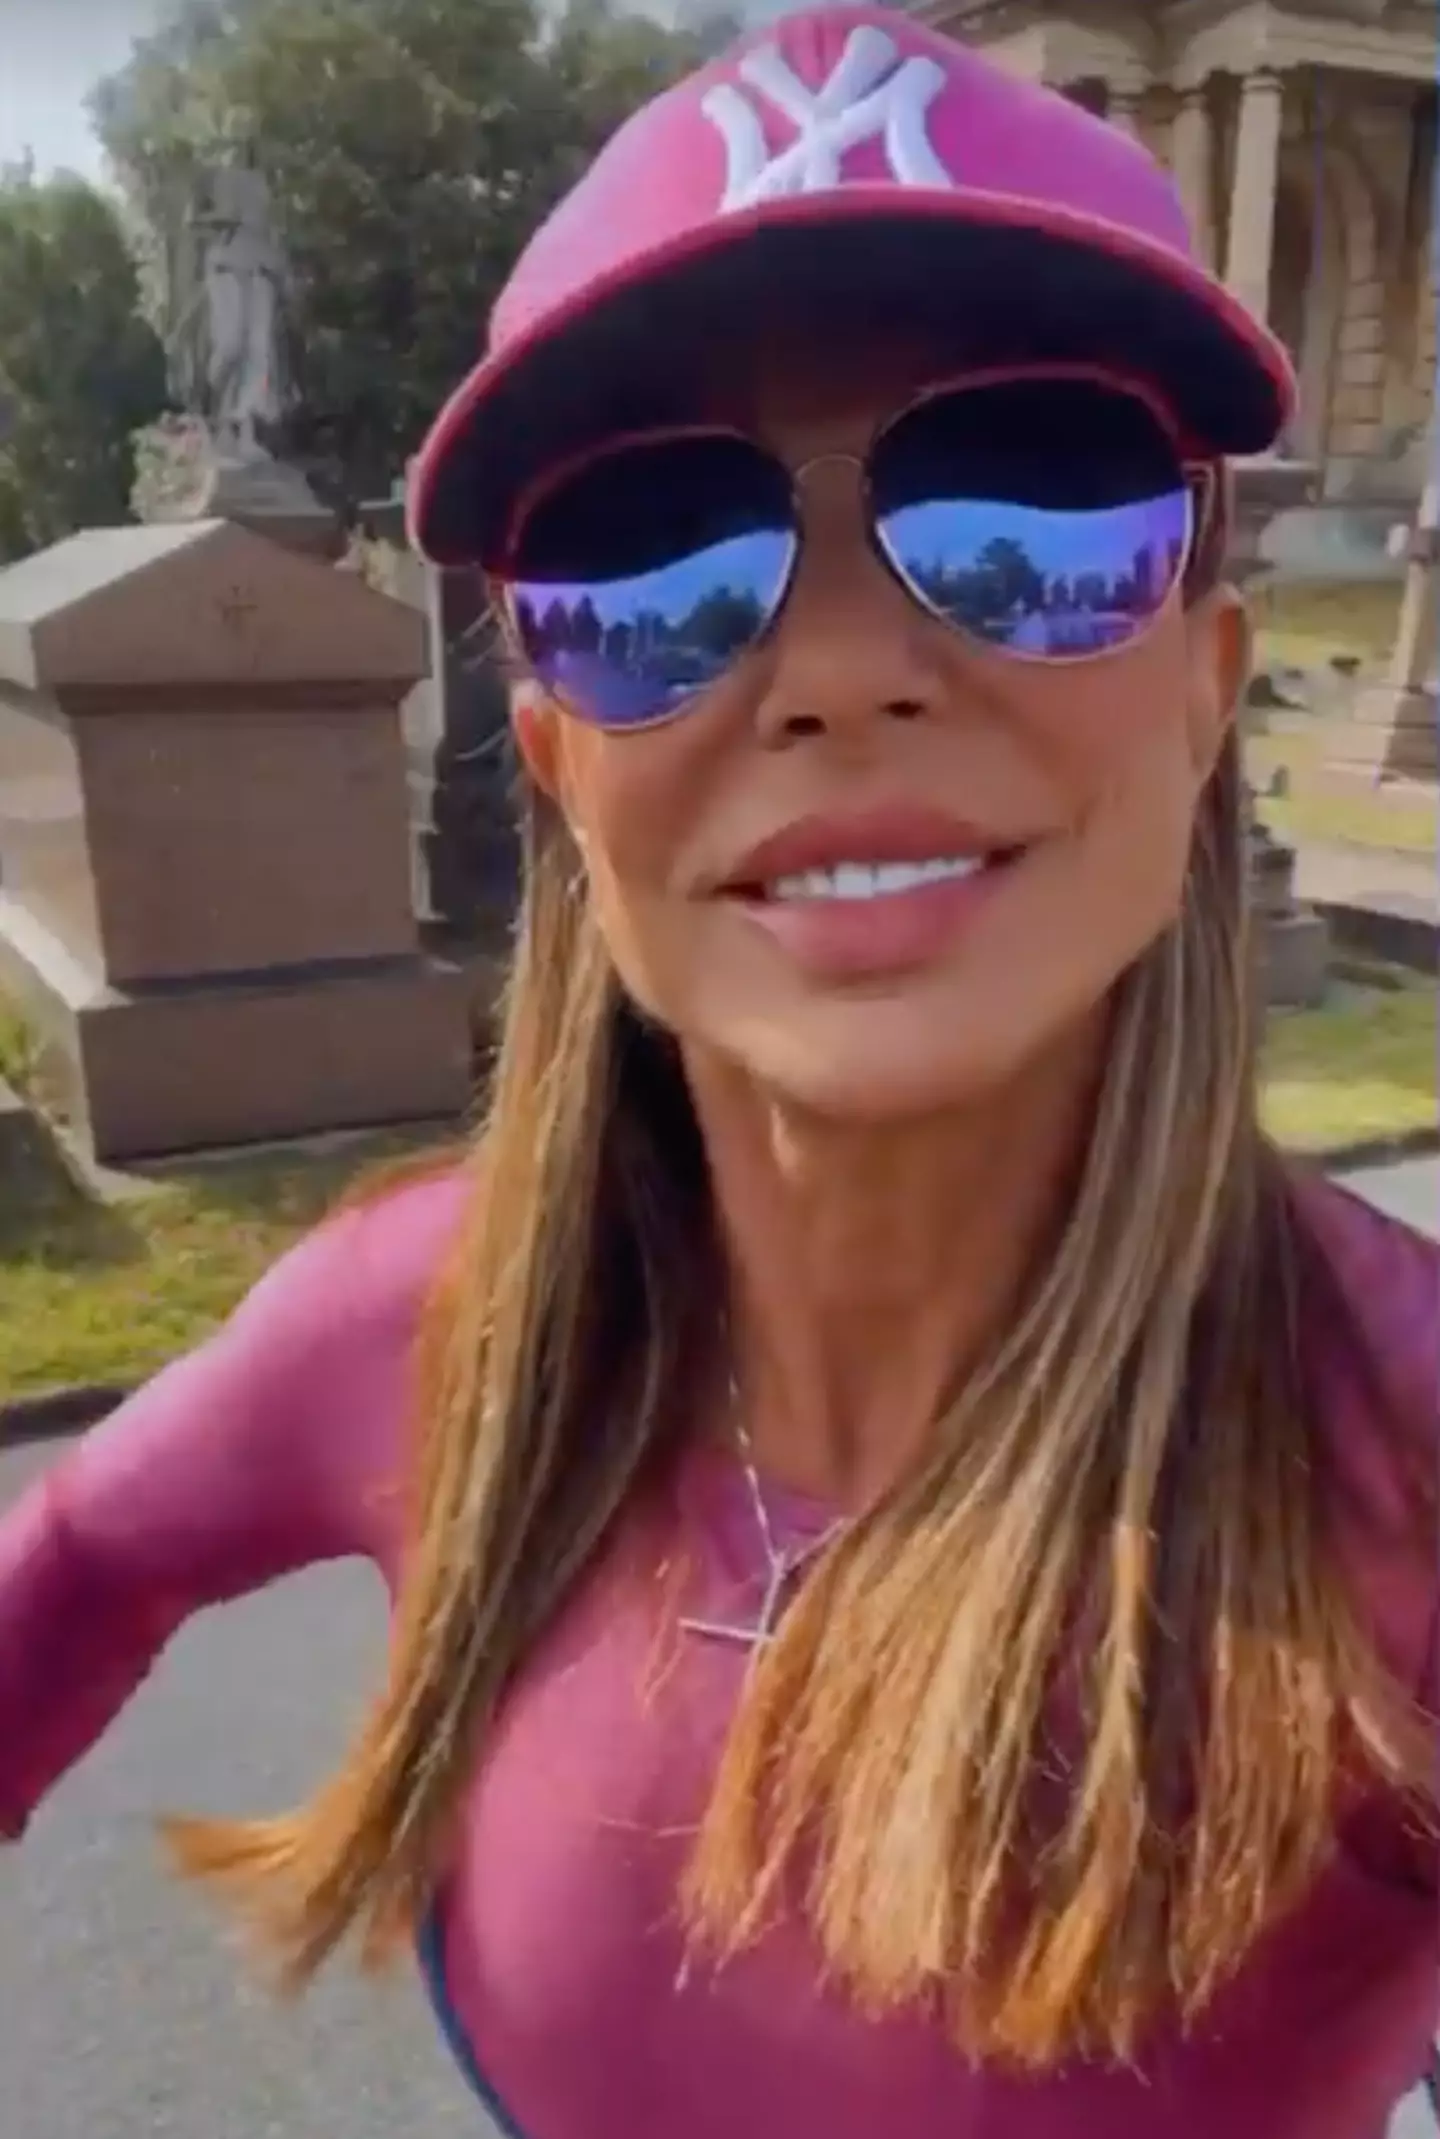 Andrea Sunshine said that people have tried to 'expel' her from the cemetery.